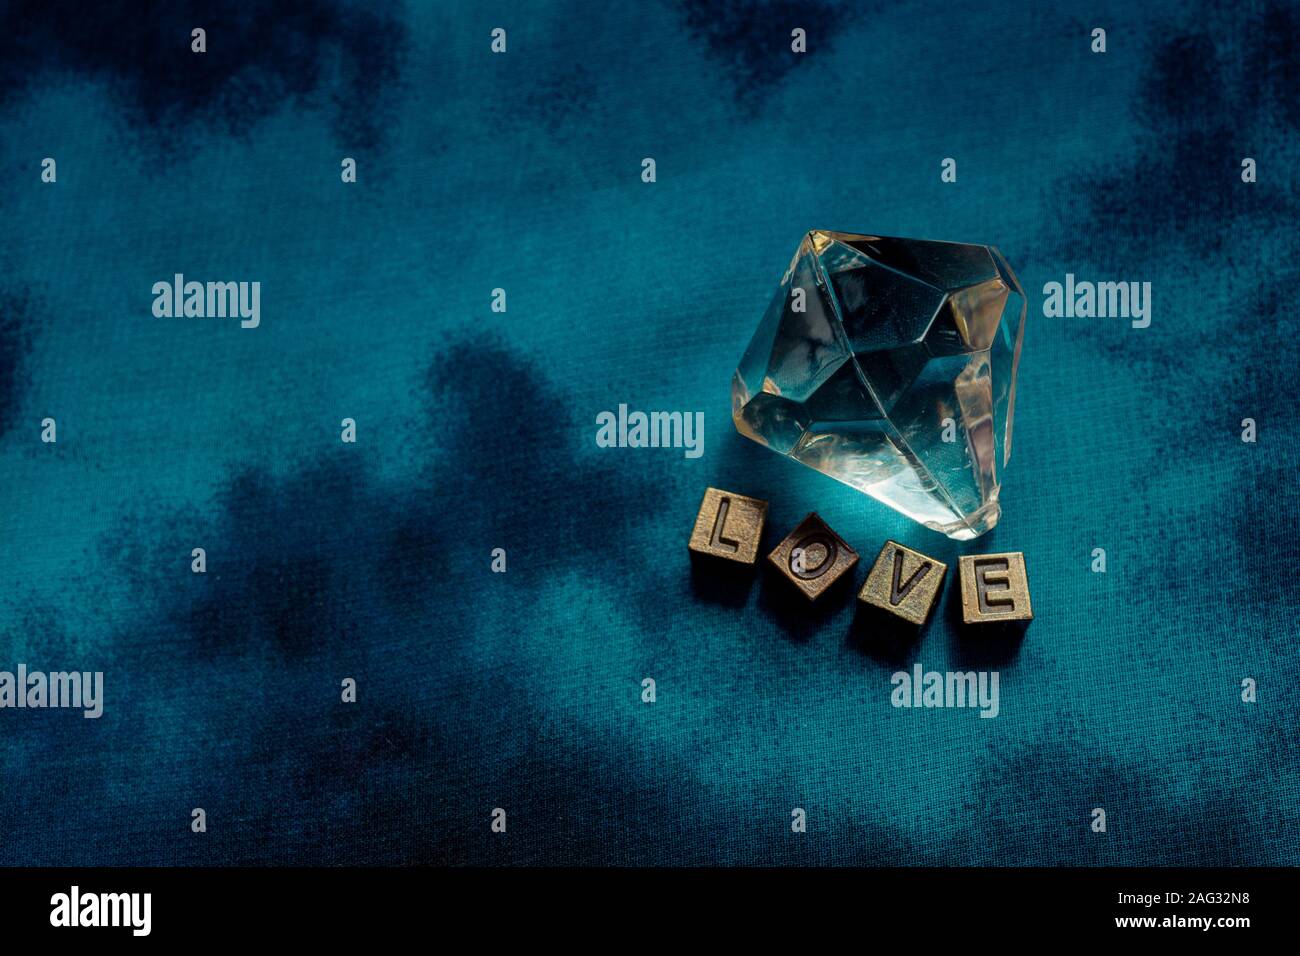 Fake diamond beside love wording with metal letters Stock Photo